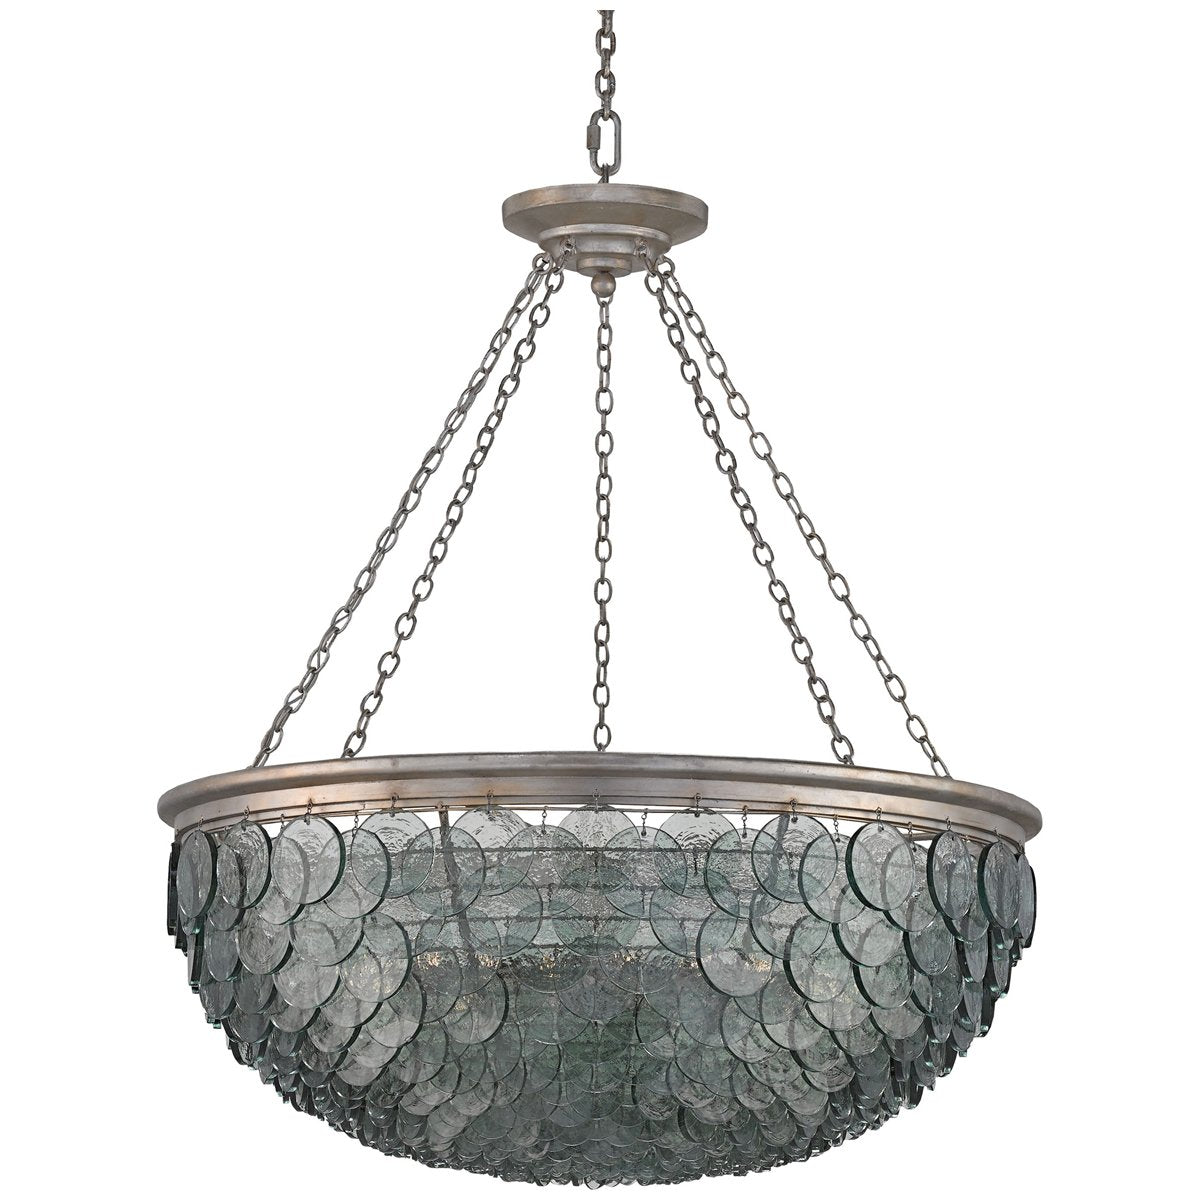 Currey and Company Quorum Large Chandelier